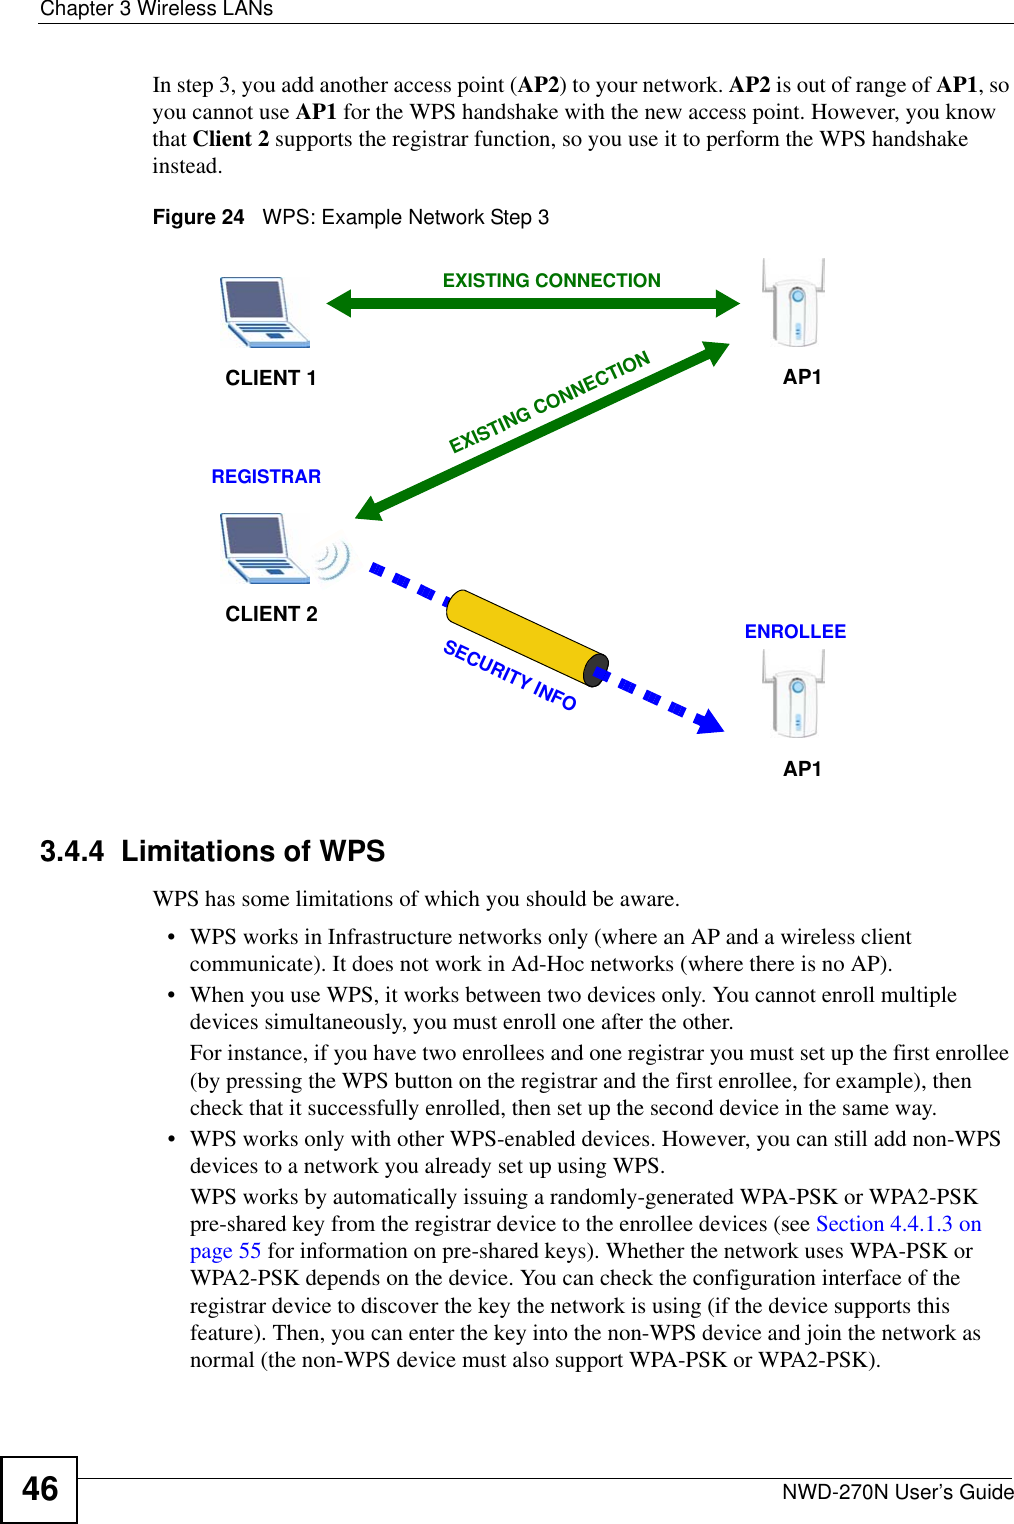 Chapter 3 Wireless LANsNWD-270N User’s Guide46In step 3, you add another access point (AP2) to your network. AP2 is out of range of AP1, so you cannot use AP1 for the WPS handshake with the new access point. However, you know that Client 2 supports the registrar function, so you use it to perform the WPS handshake instead.Figure 24   WPS: Example Network Step 33.4.4  Limitations of WPSWPS has some limitations of which you should be aware. • WPS works in Infrastructure networks only (where an AP and a wireless client communicate). It does not work in Ad-Hoc networks (where there is no AP).• When you use WPS, it works between two devices only. You cannot enroll multiple devices simultaneously, you must enroll one after the other. For instance, if you have two enrollees and one registrar you must set up the first enrollee (by pressing the WPS button on the registrar and the first enrollee, for example), then check that it successfully enrolled, then set up the second device in the same way.• WPS works only with other WPS-enabled devices. However, you can still add non-WPS devices to a network you already set up using WPS. WPS works by automatically issuing a randomly-generated WPA-PSK or WPA2-PSK pre-shared key from the registrar device to the enrollee devices (see Section 4.4.1.3 on page 55 for information on pre-shared keys). Whether the network uses WPA-PSK or WPA2-PSK depends on the device. You can check the configuration interface of the registrar device to discover the key the network is using (if the device supports this feature). Then, you can enter the key into the non-WPS device and join the network as normal (the non-WPS device must also support WPA-PSK or WPA2-PSK).CLIENT 1 AP1REGISTRARCLIENT 2EXISTING CONNECTIONSECURITY INFOENROLLEEAP1EXISTING CONNECTION